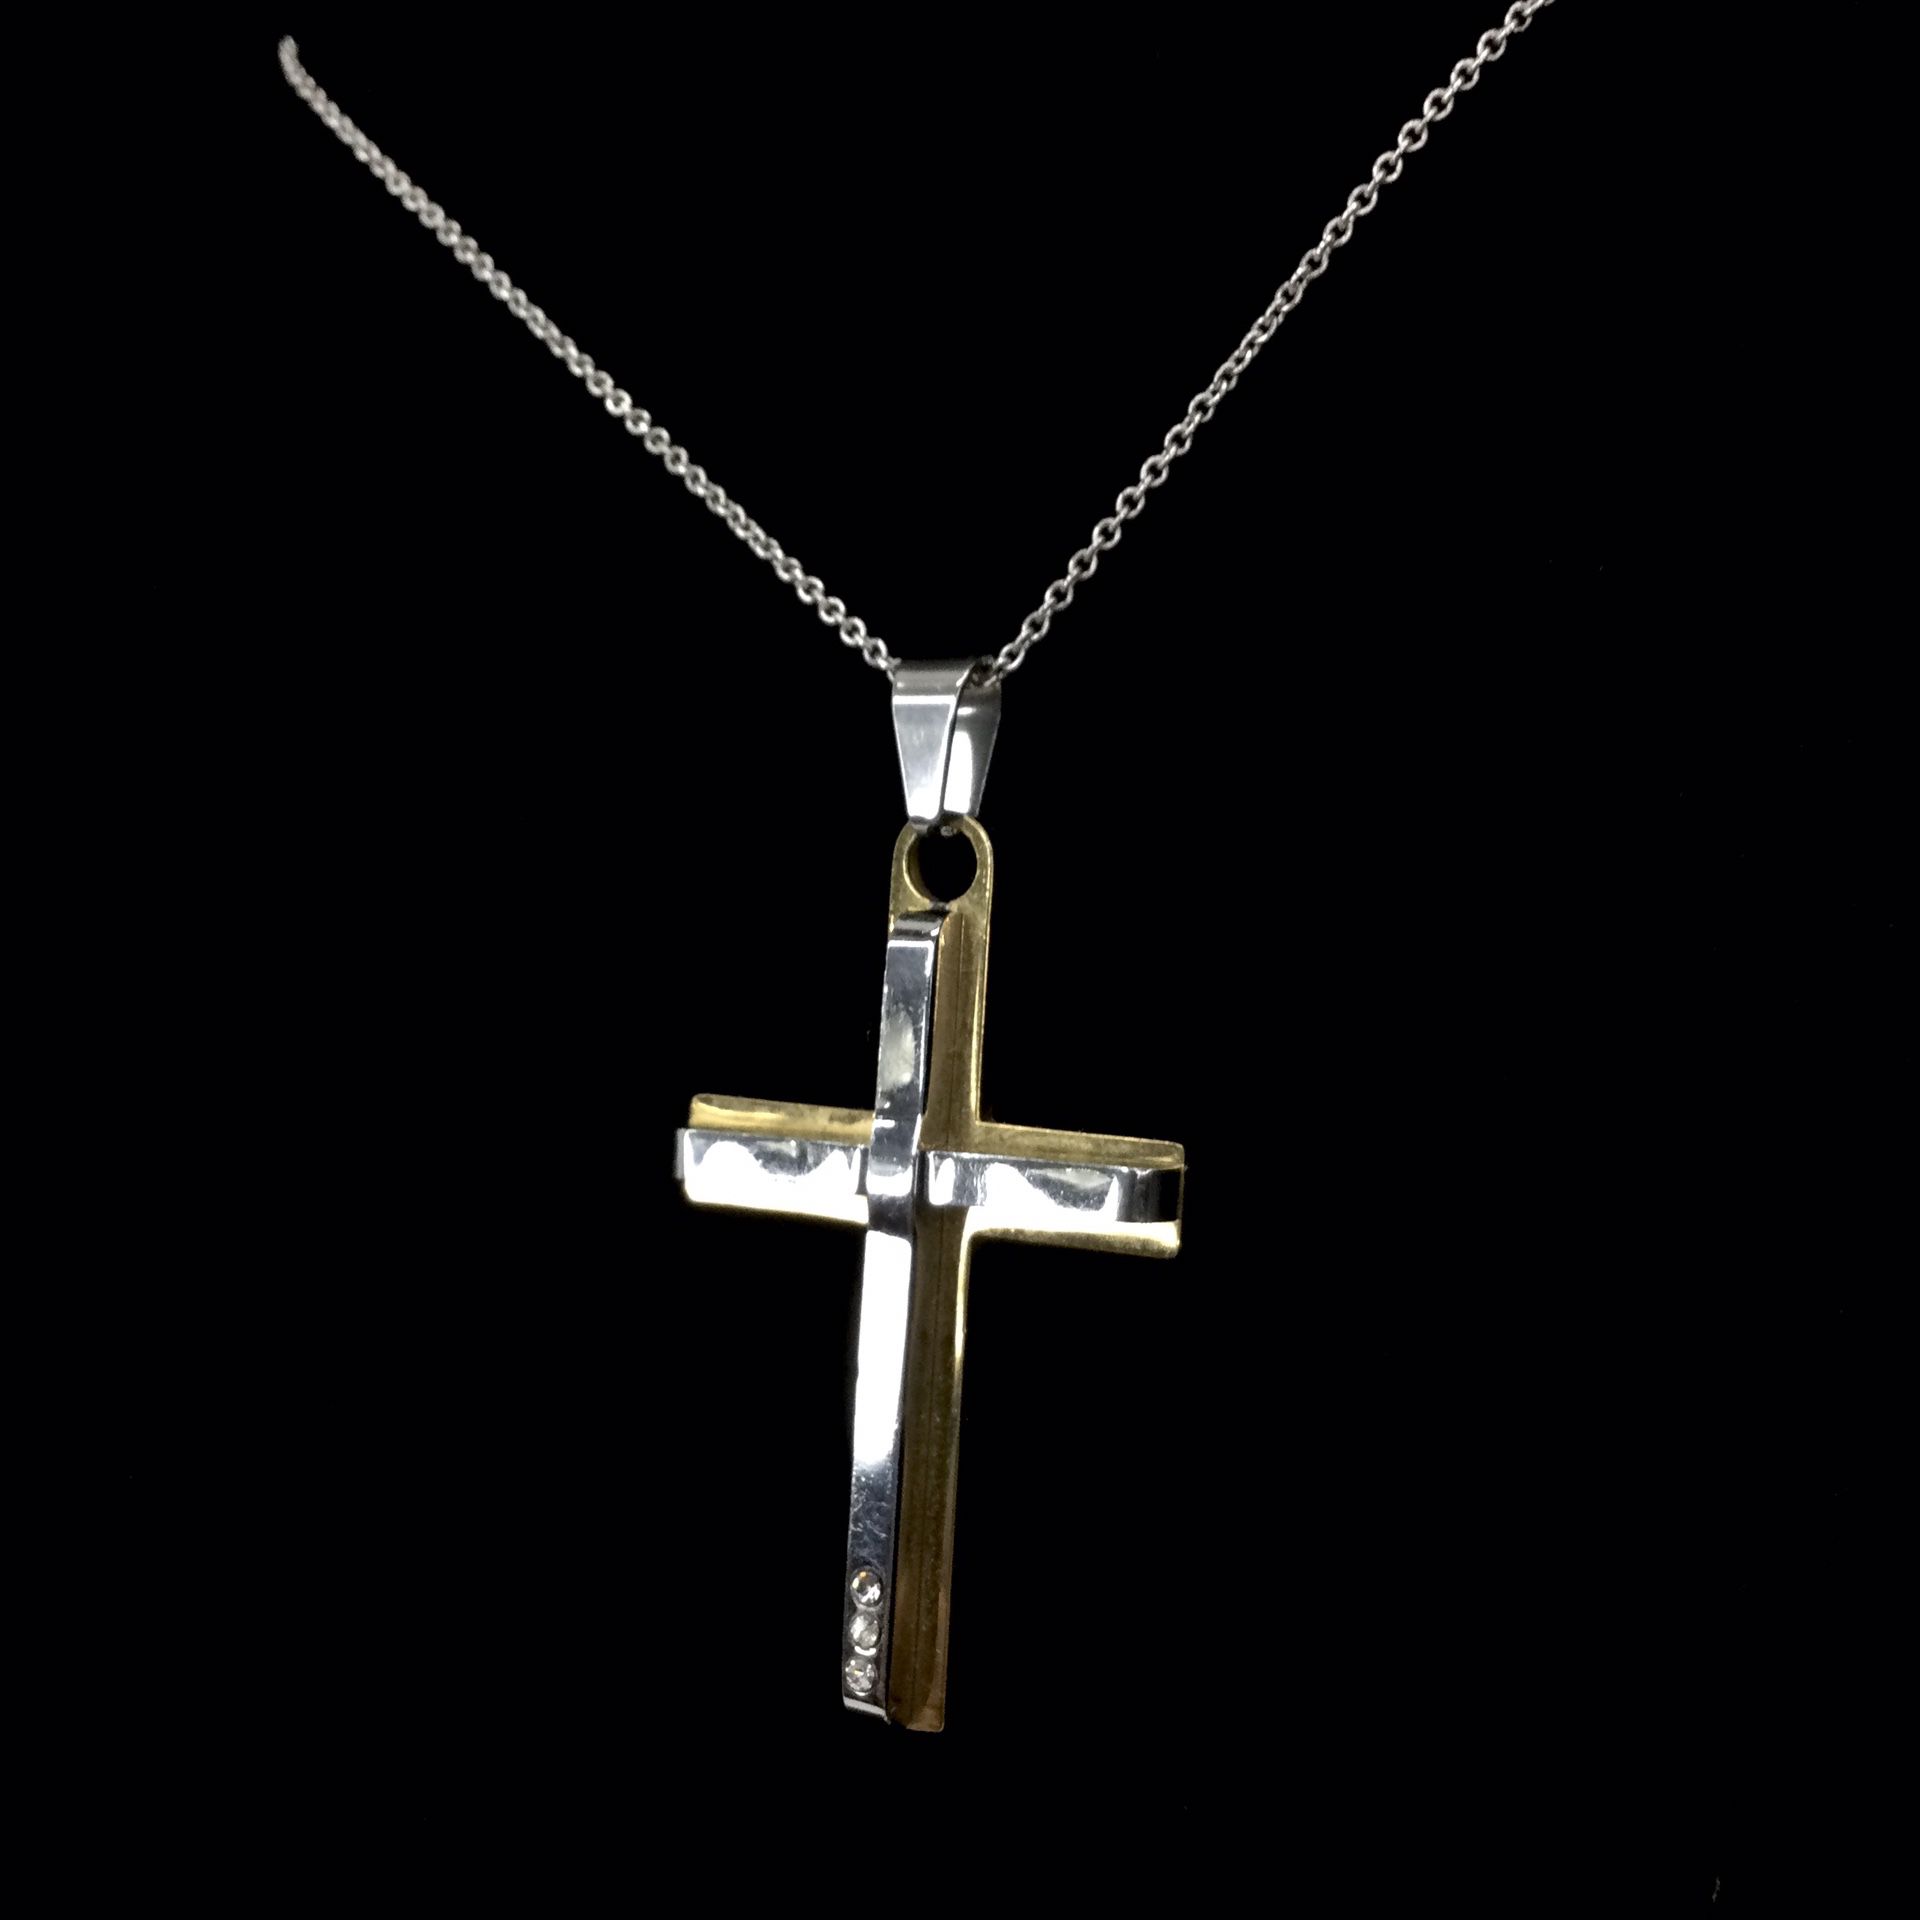 Stainless Steel Cross Pendant Necklace Set 